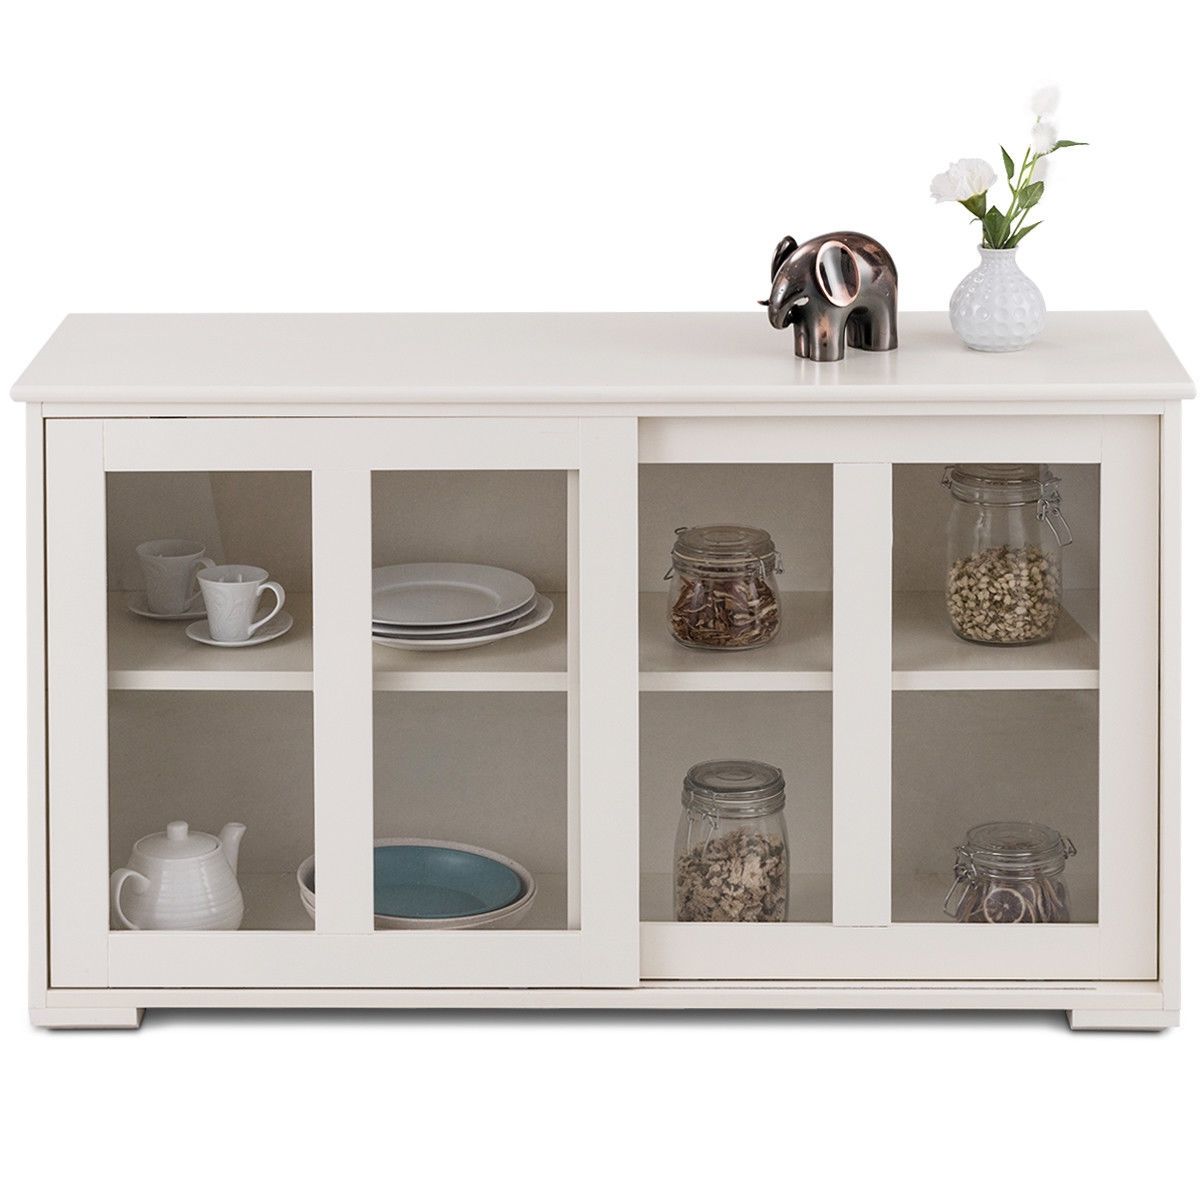 Sideboard Buffet Cupboard Storage Cabinet With Sliding Door Pertaining To Glass Sliding Door Stackable Buffets (View 14 of 20)